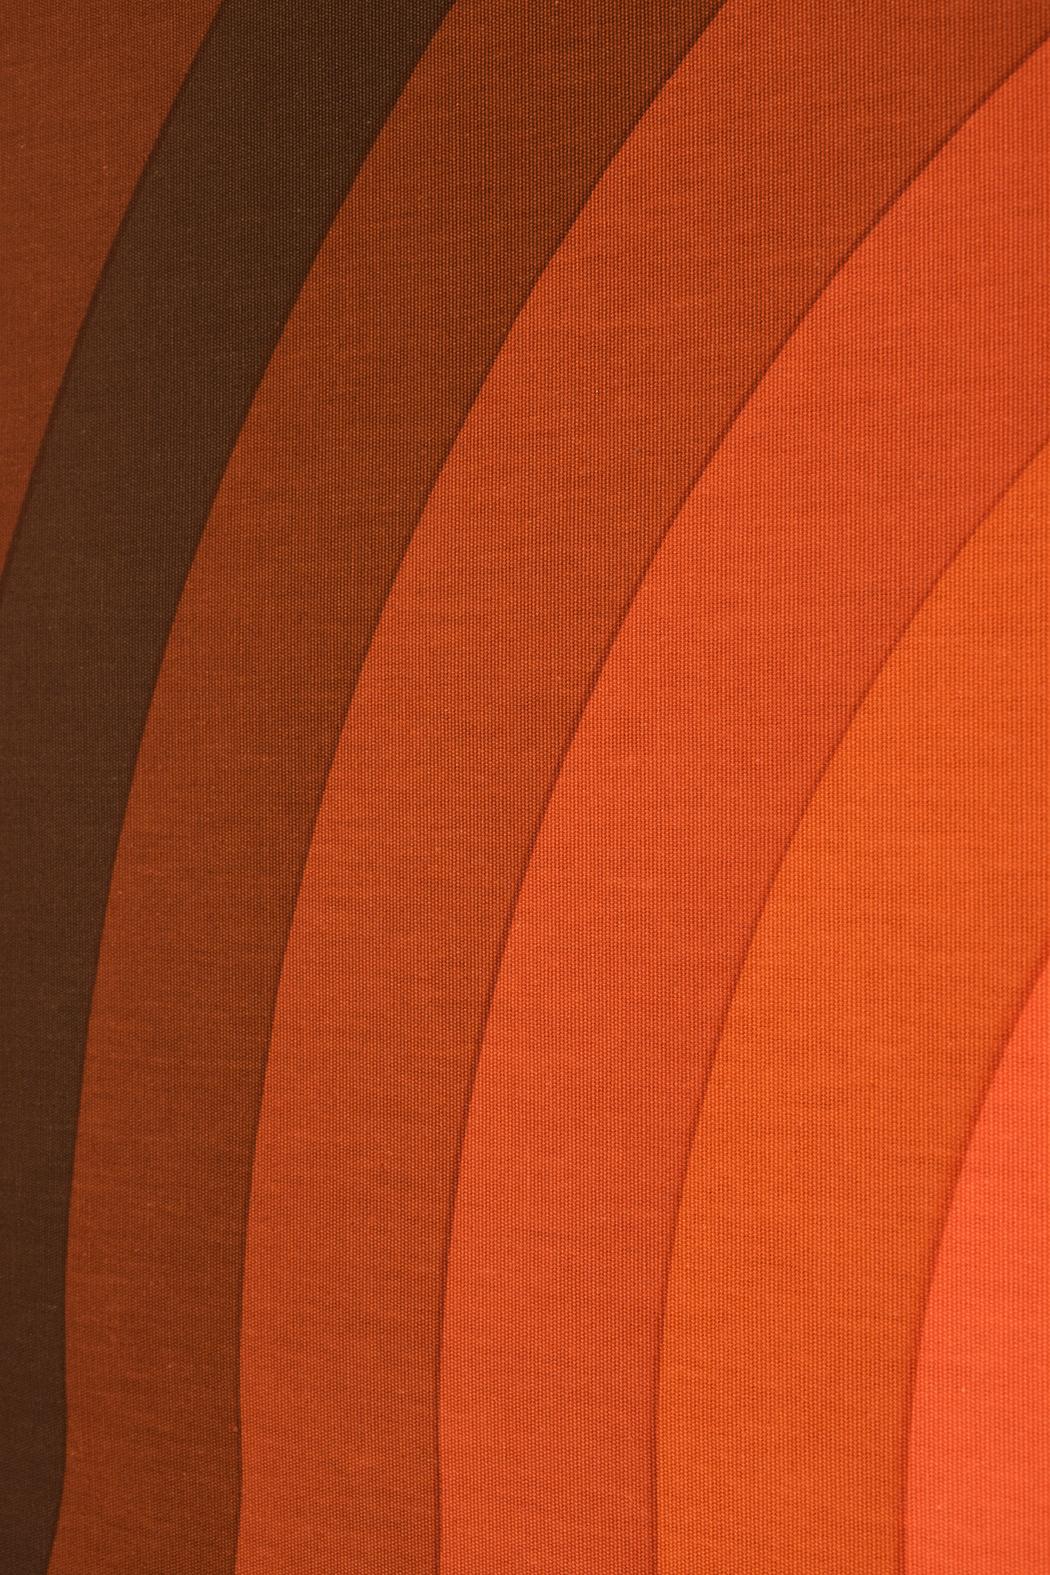 This Vernon Panton Art Wall Decor by Mira is part of her Art Textile Collection and has a multi-colored wave design. This piece has a multi-layer color design with a retro color palette synonymous with the '70s. This Modern Textile Wall Decor is